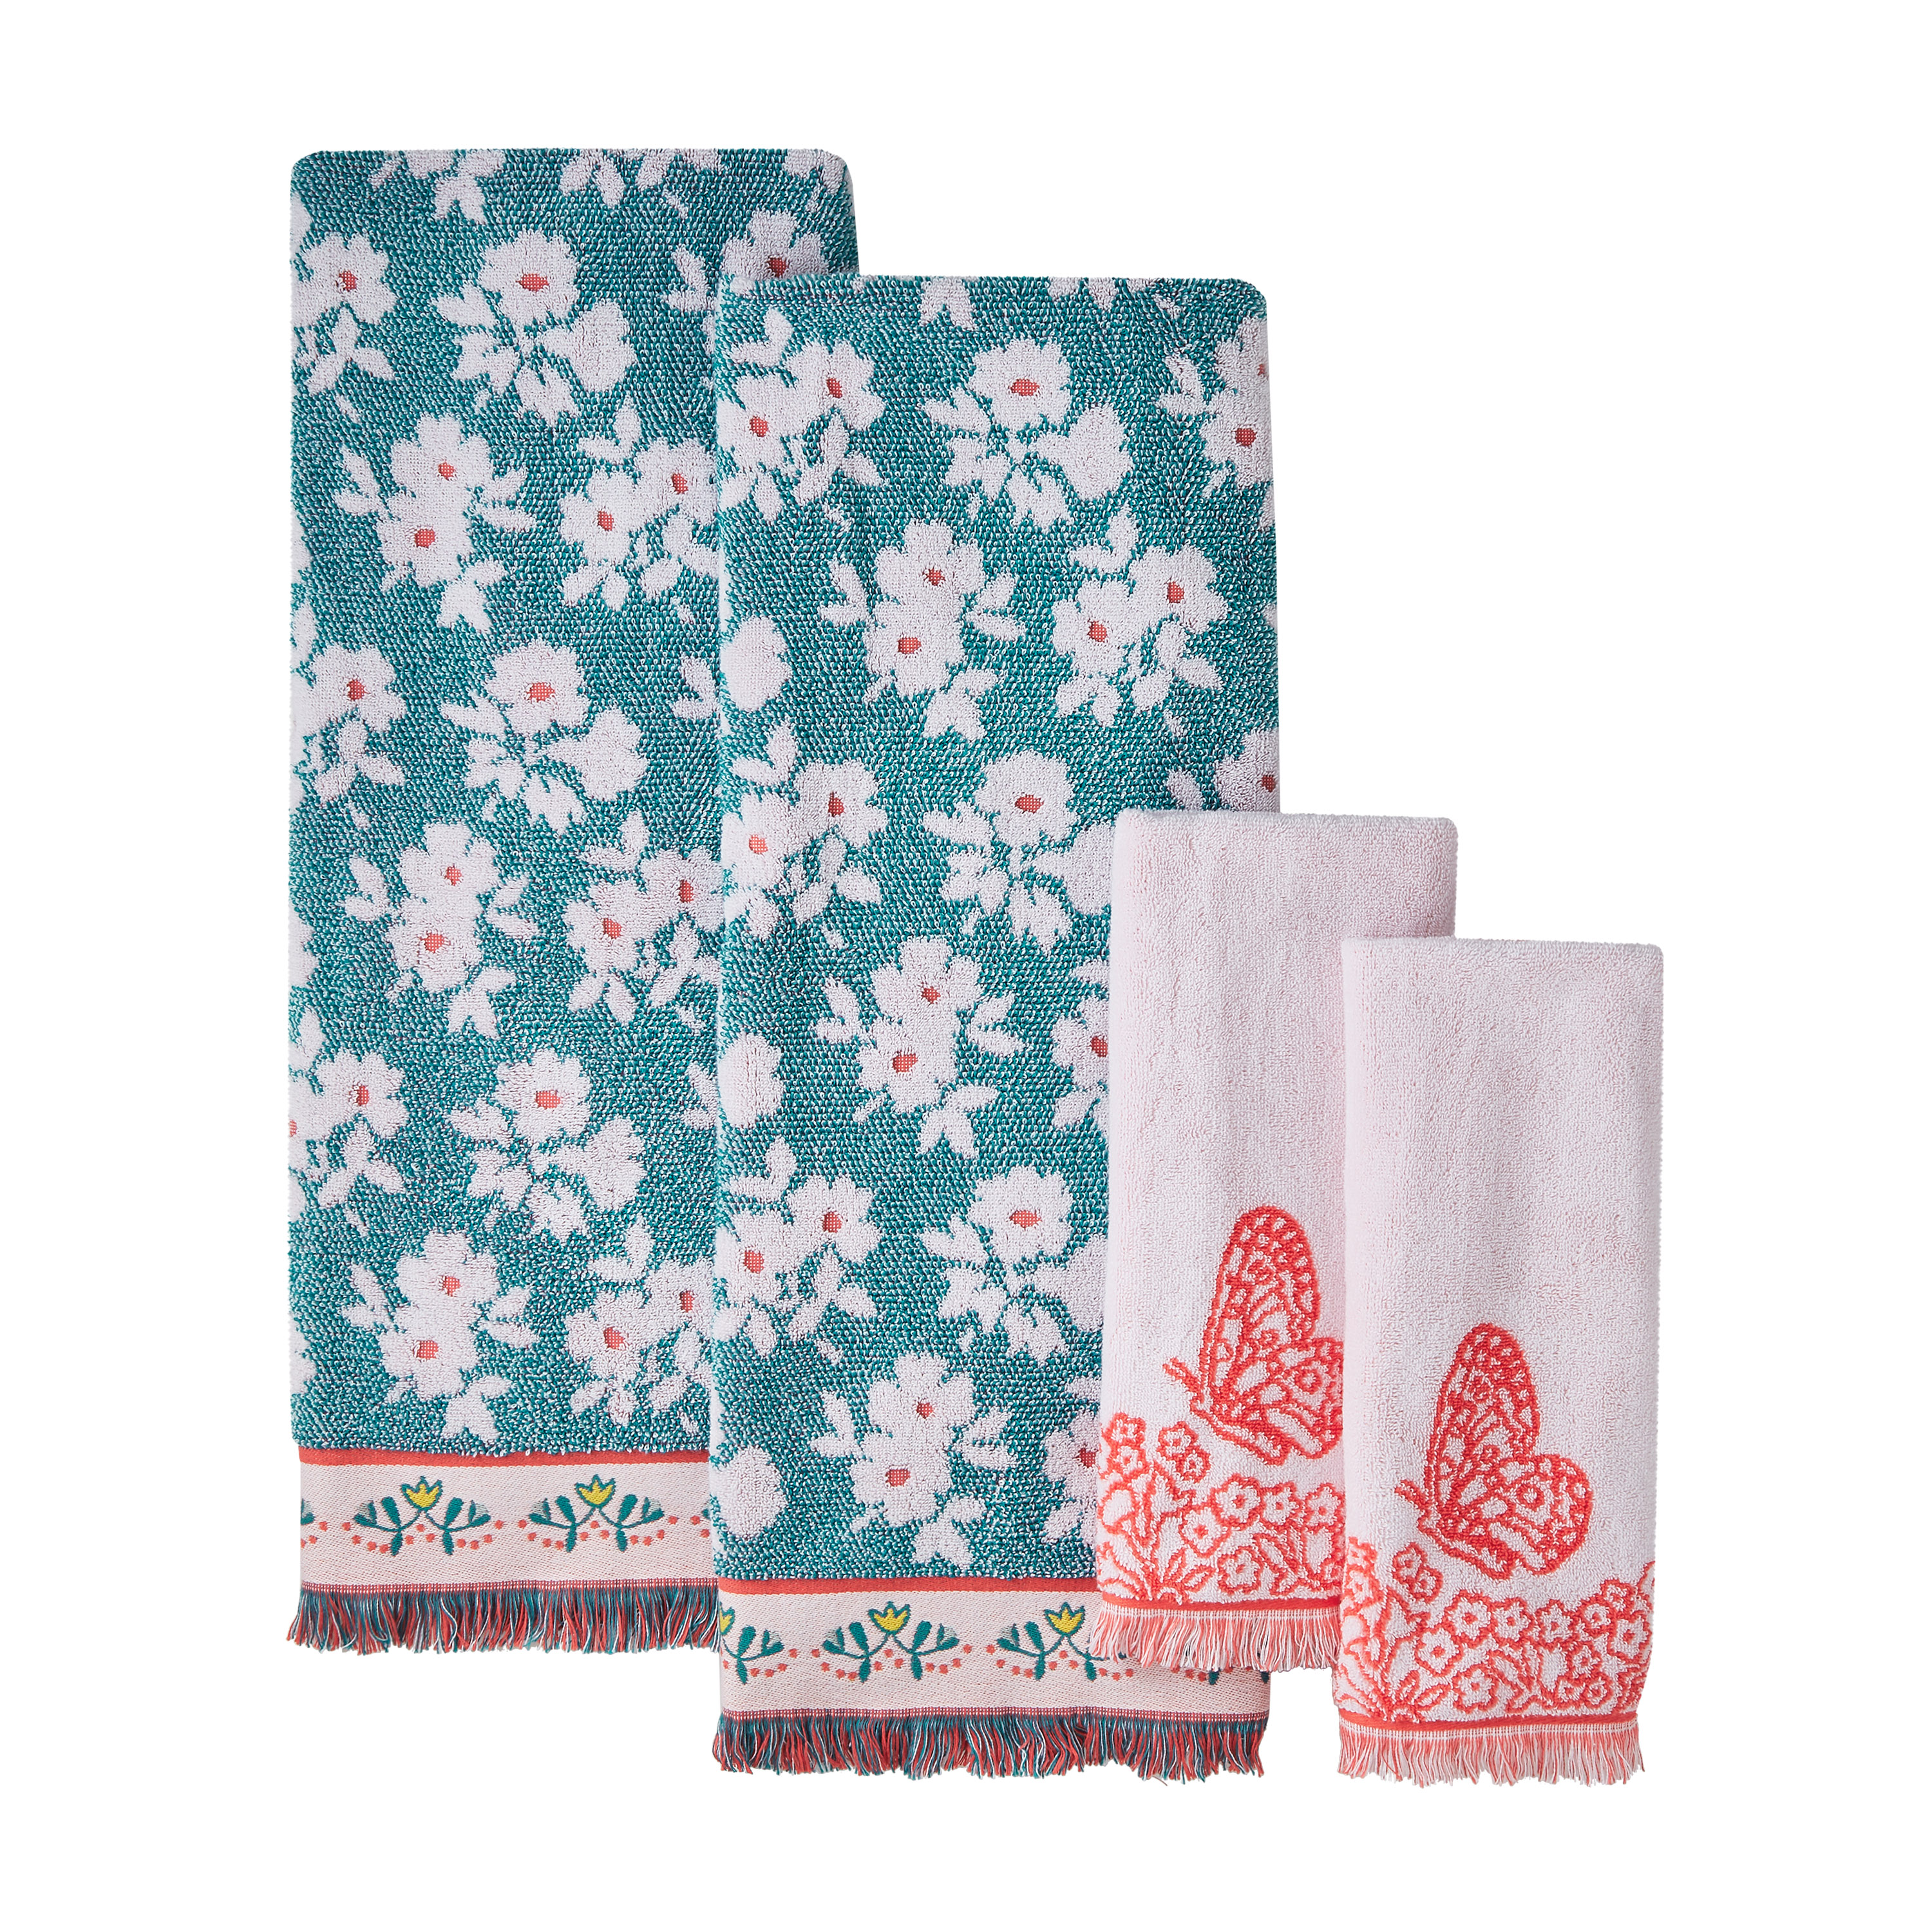 The Pioneer Woman 4 Piece Cotton Bath Towel Set, Teal Thunder Green - image 3 of 5